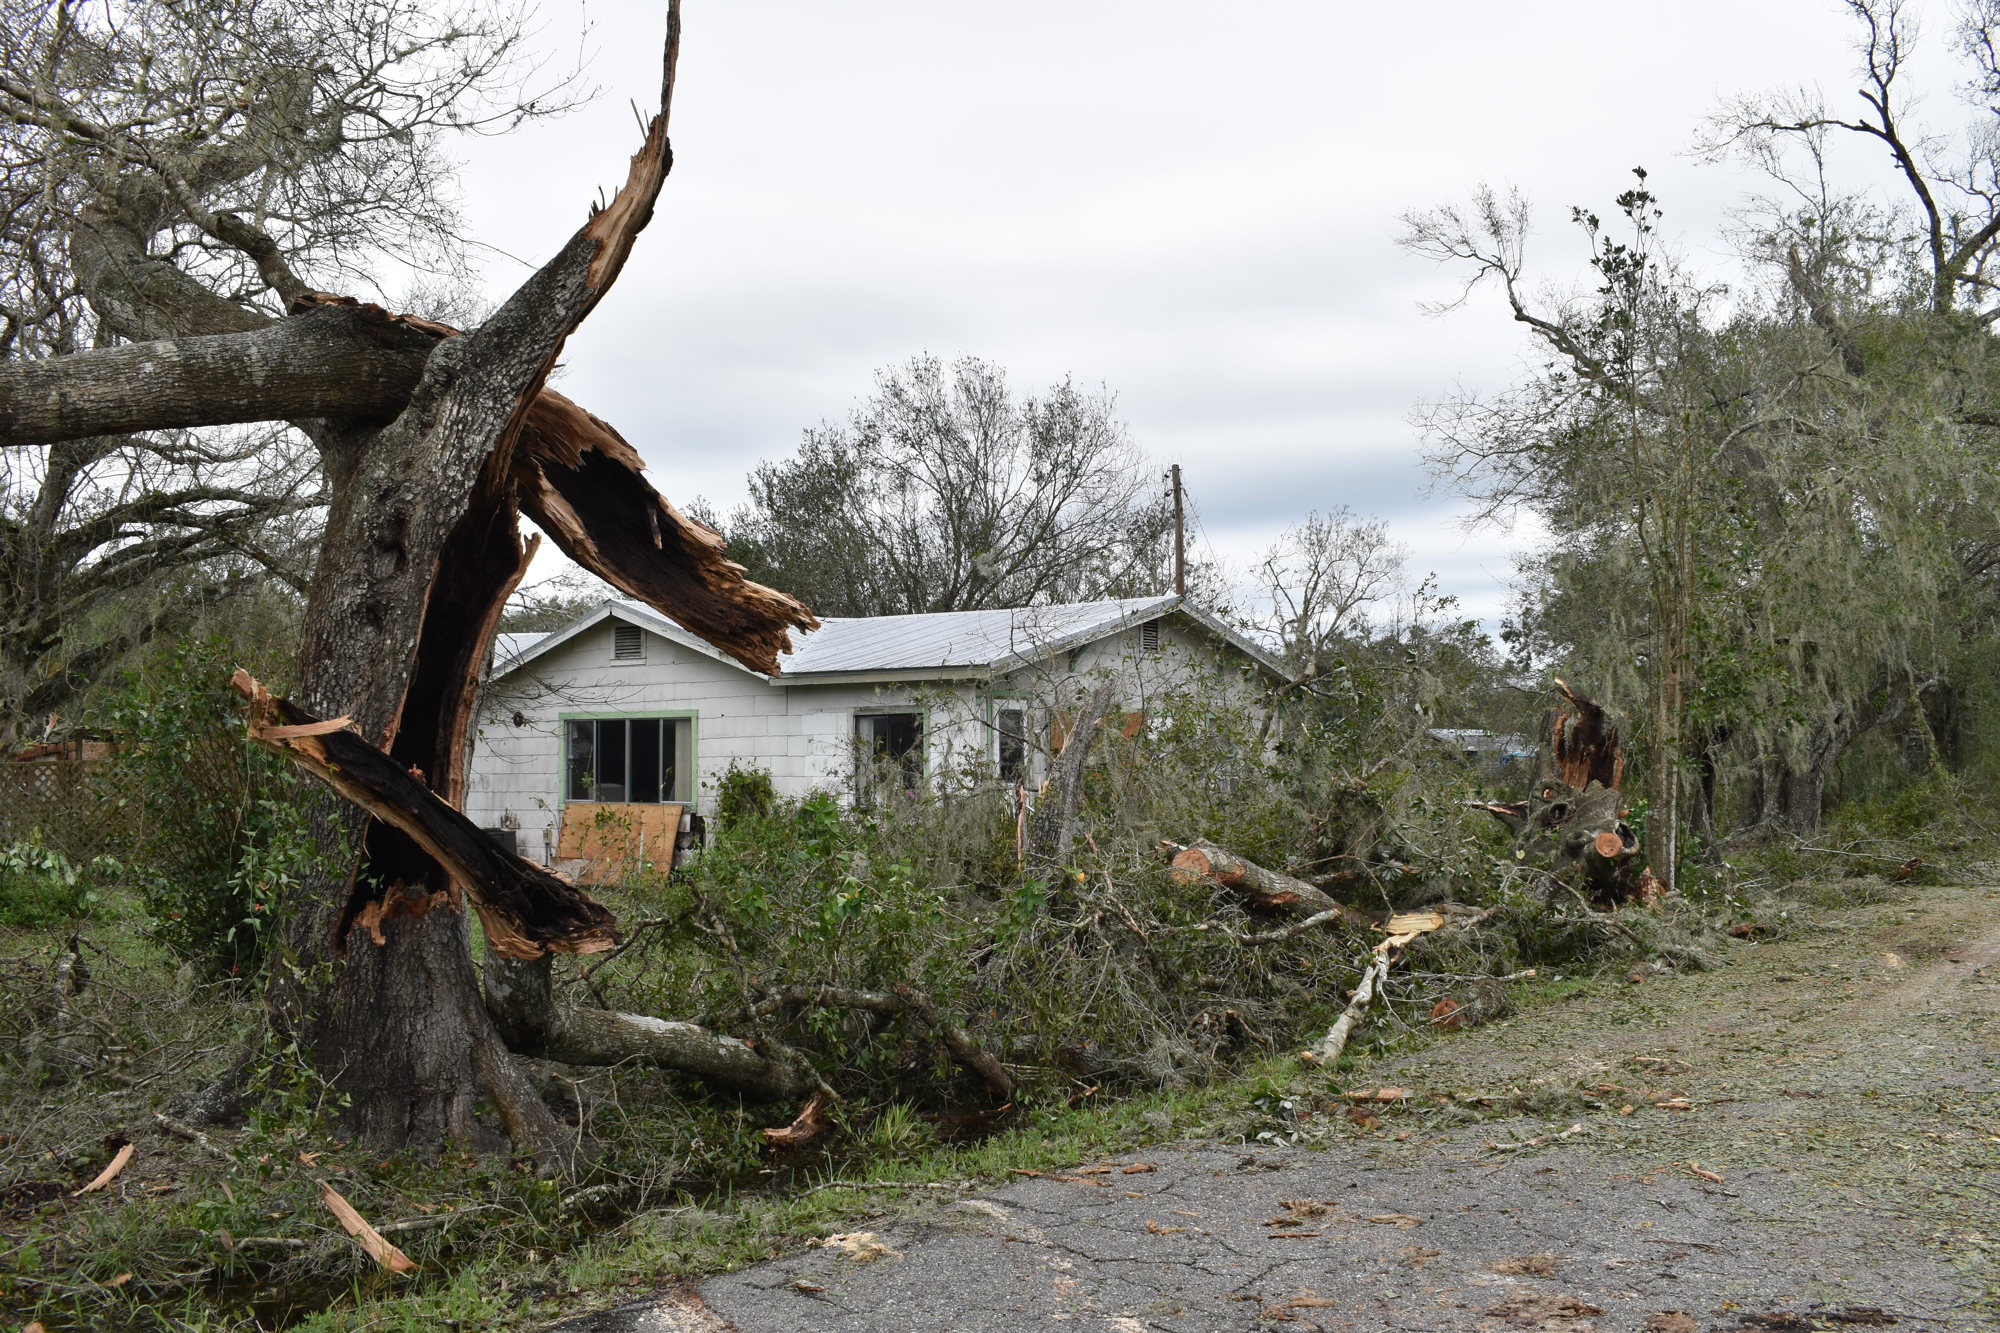 Damage to oak trees outside a Myakka City home Thursday afternoon. (Photo by Ian Swaby)